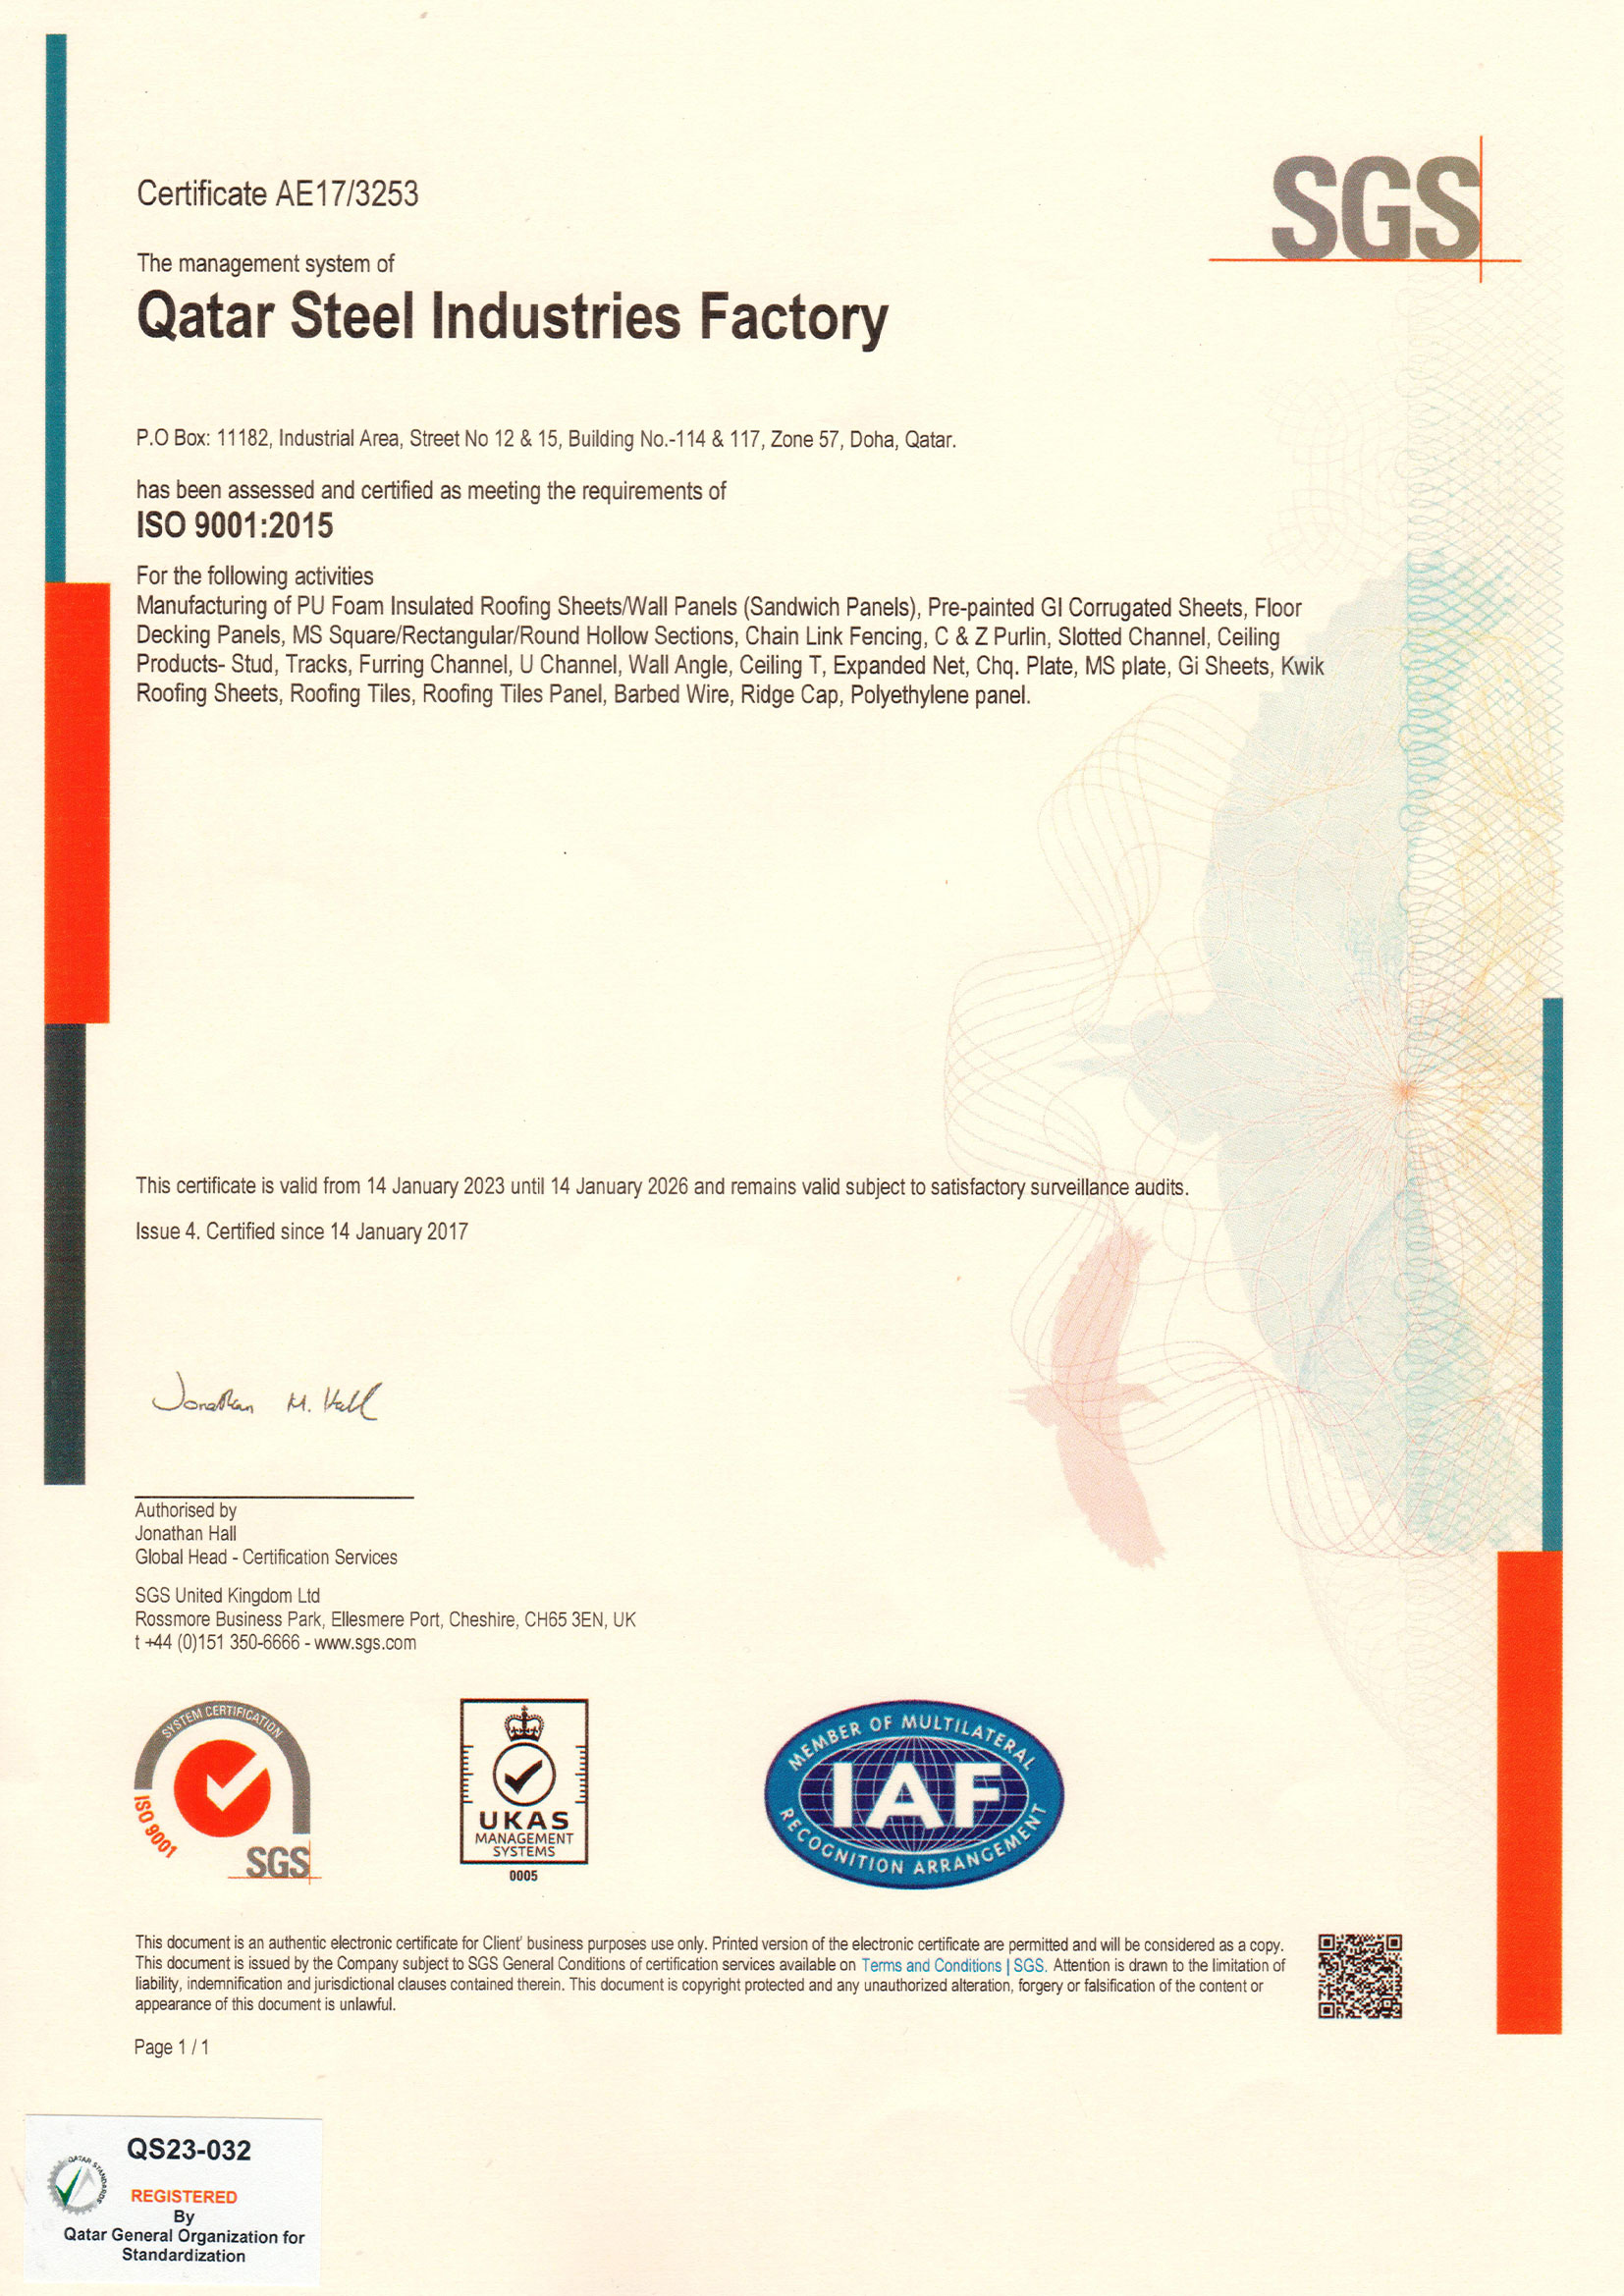 Qatar Steel Factory Quality Certification ISO-9001-2015